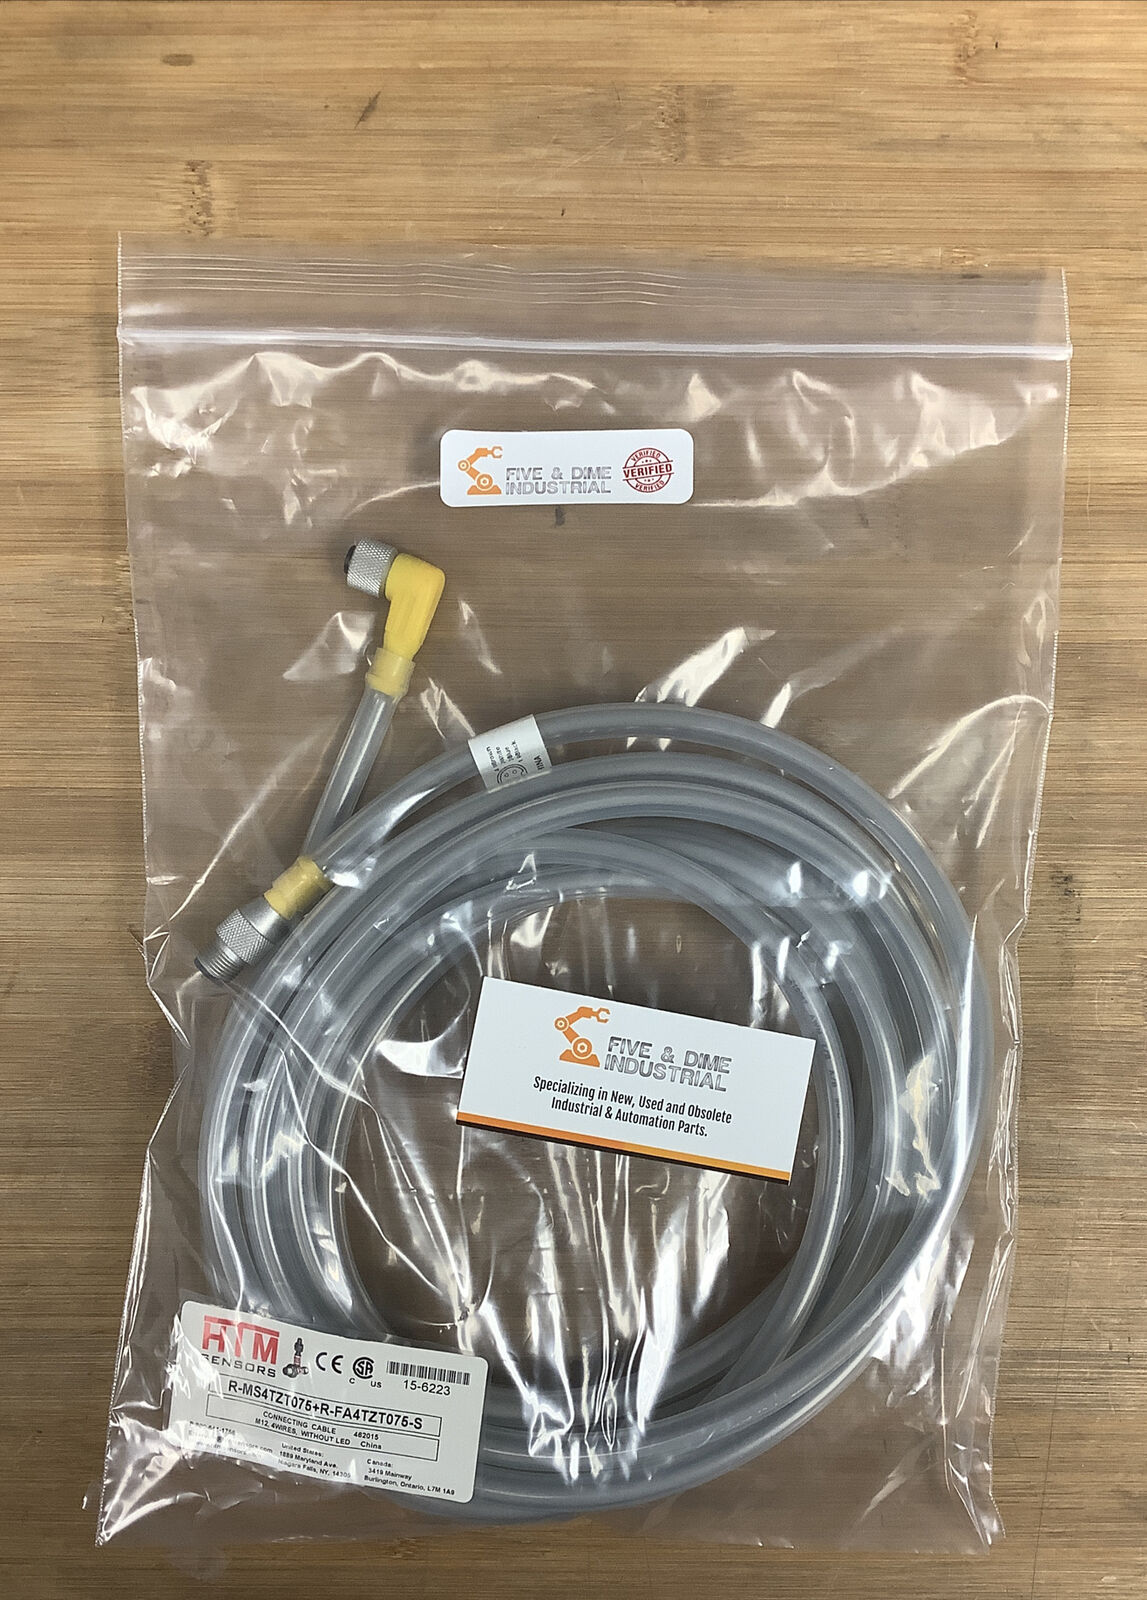 HTM Cable 15-6223 Male Straight Female 90° Weld Proof  (CBL112)